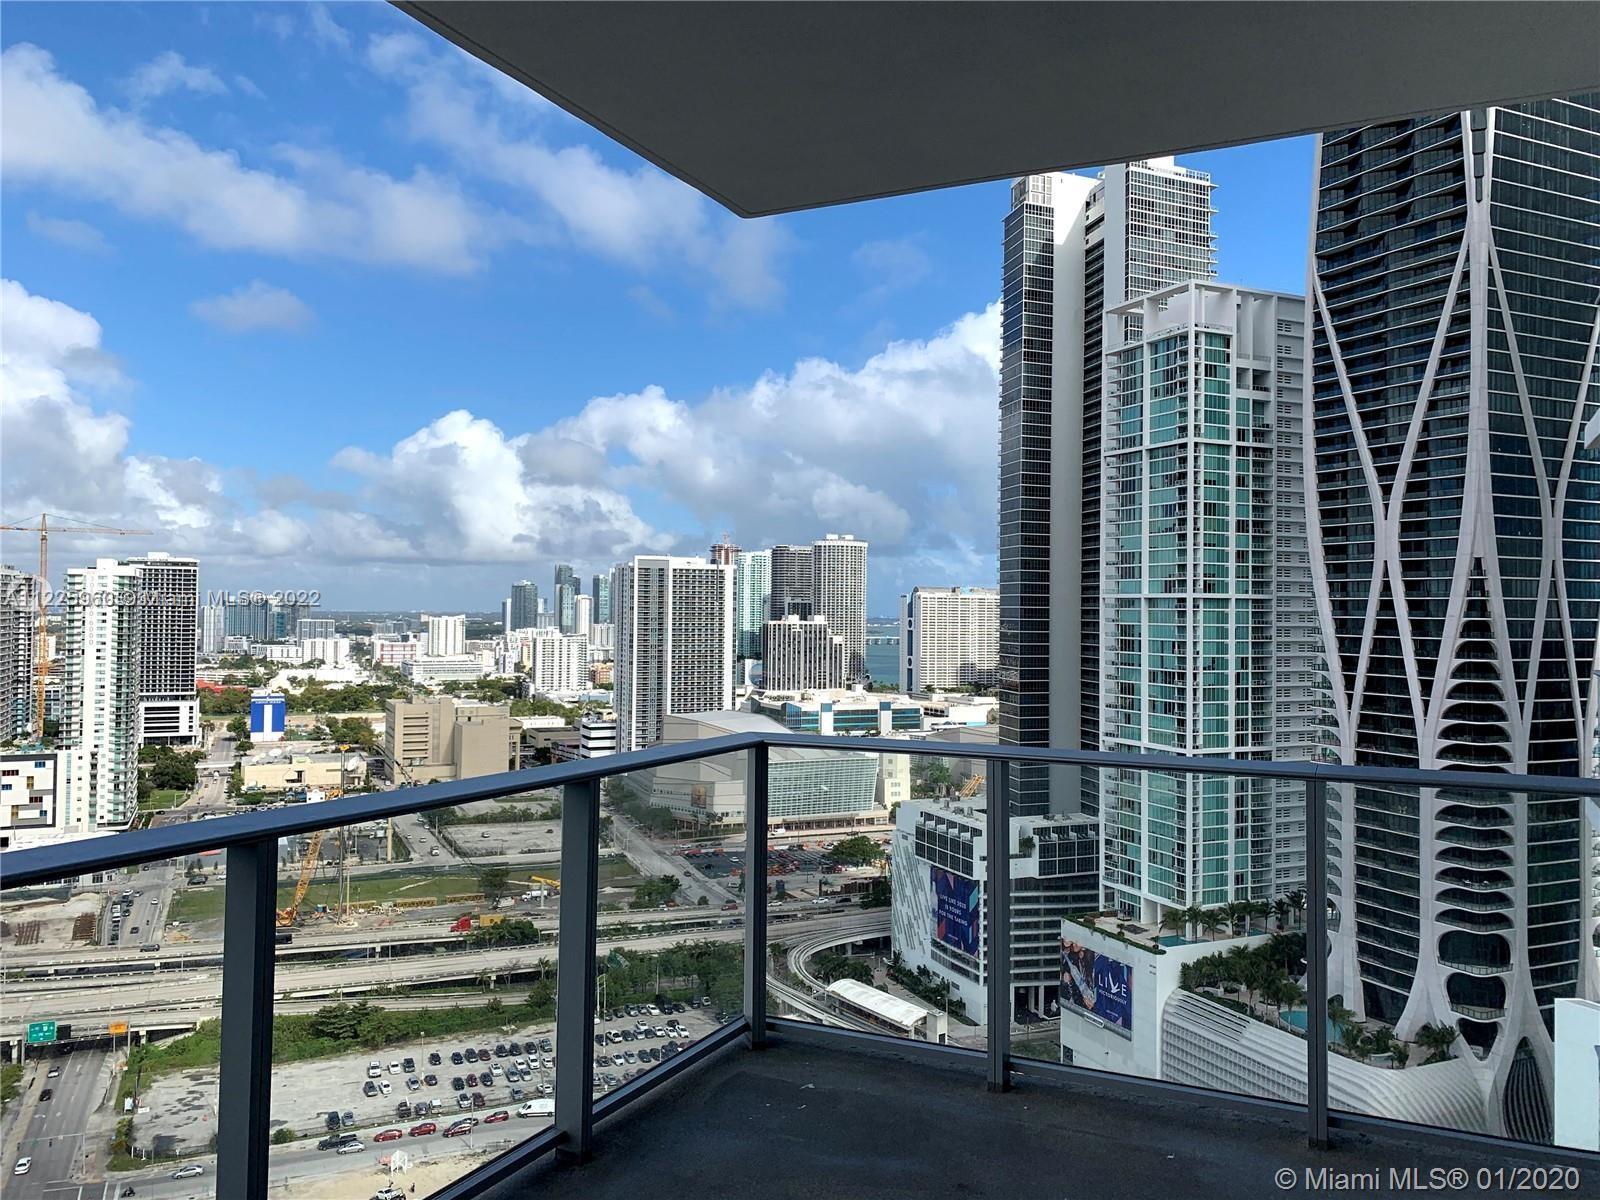 Enjoy Beautiful sunset views of Miami in beautiful 1 bed + Den & 2 full baths. White ceramic floors throughout, Over sized balcony, Valet. Be the 1st to live in the "Most Amenities in the World" building including resort-style pools, spa, yoga studio, incredible gym w/ boxing area with complimentary classes, game room, virtual golf, basketball court, bbq kitchen, racquetball, kids play area & so much more to come soon including a soccer field, tennis courts, jacuzzi overlooking Miami, 56th floor lounge room with Miami Panoramic views, 58 floor skydeck, observatory w/ telescopes to gaze at the stars. Steps from Metro Mover, Virgin Train Station, Port of Miami, AA Arena, Bayside, Museums & Adrienne Arsht Center. Centrally located, minutes from the Airport, Brickell, Wynwood, Miami Beach